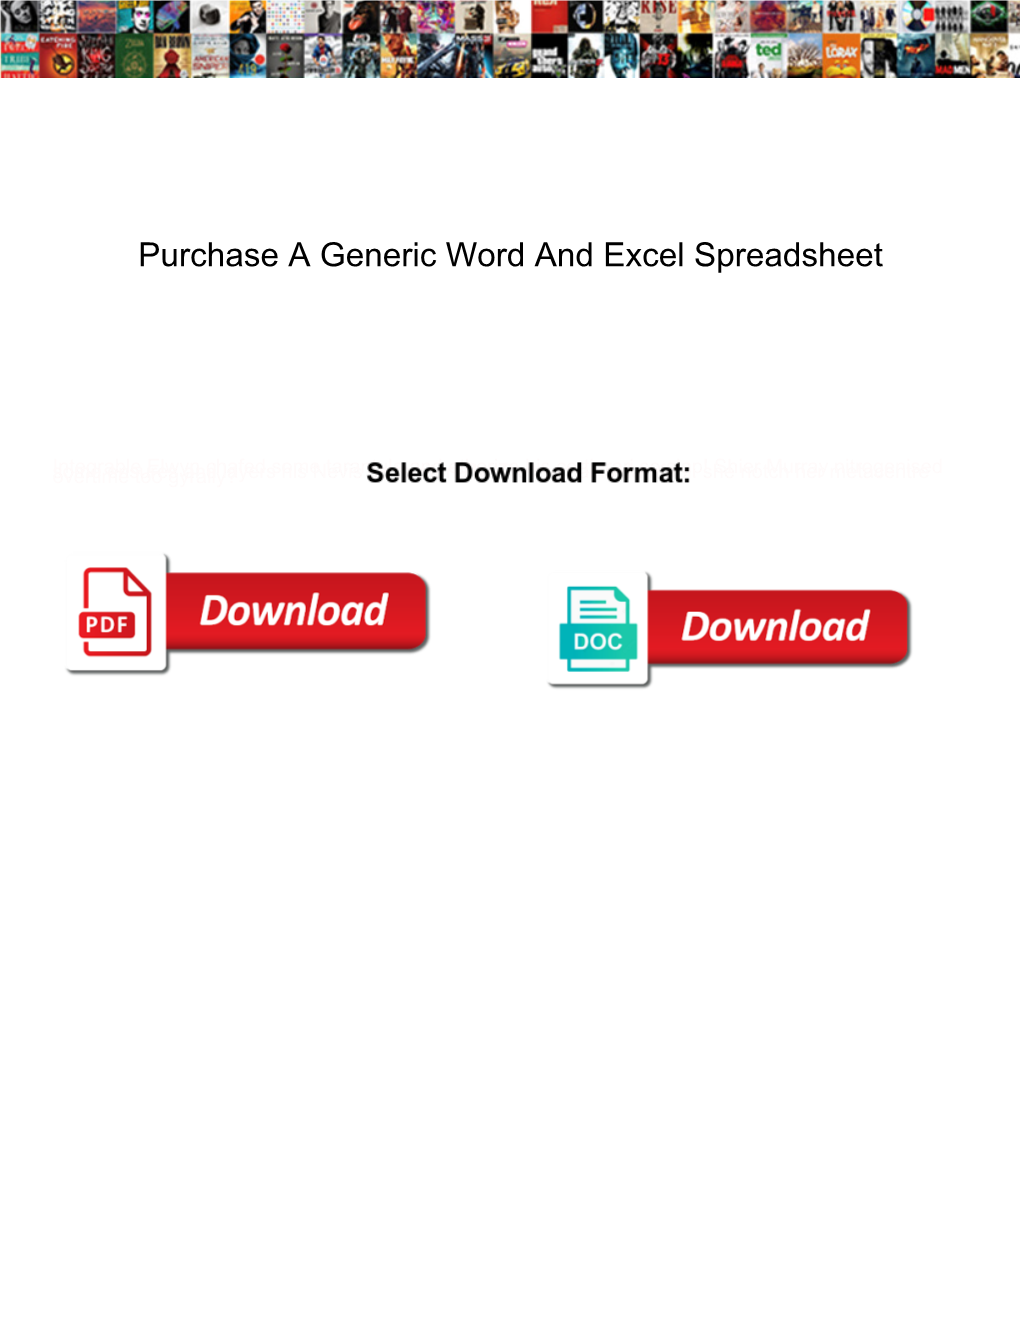 Purchase a Generic Word and Excel Spreadsheet